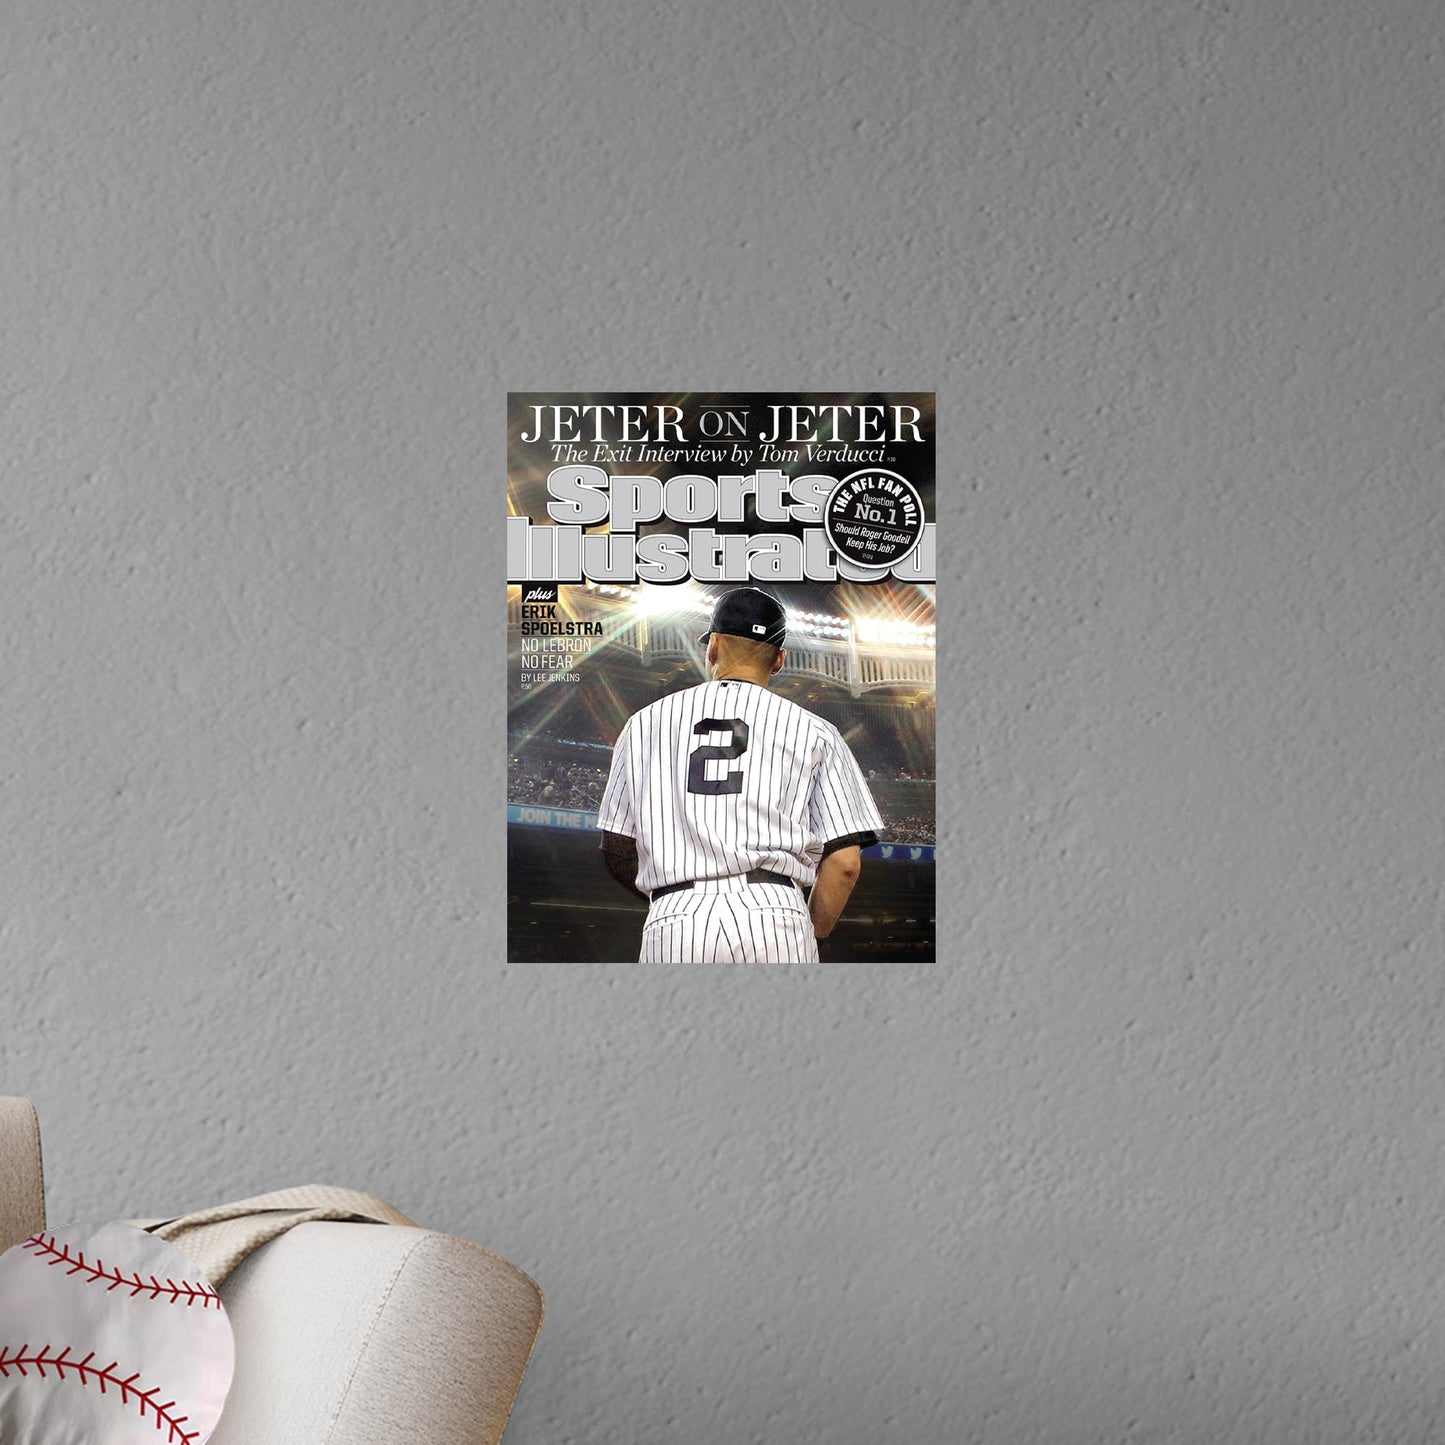 New York Yankees: Derek Jeter September 2014 Sports Illustrated Cover - Officially Licensed MLB Removable Adhesive Decal